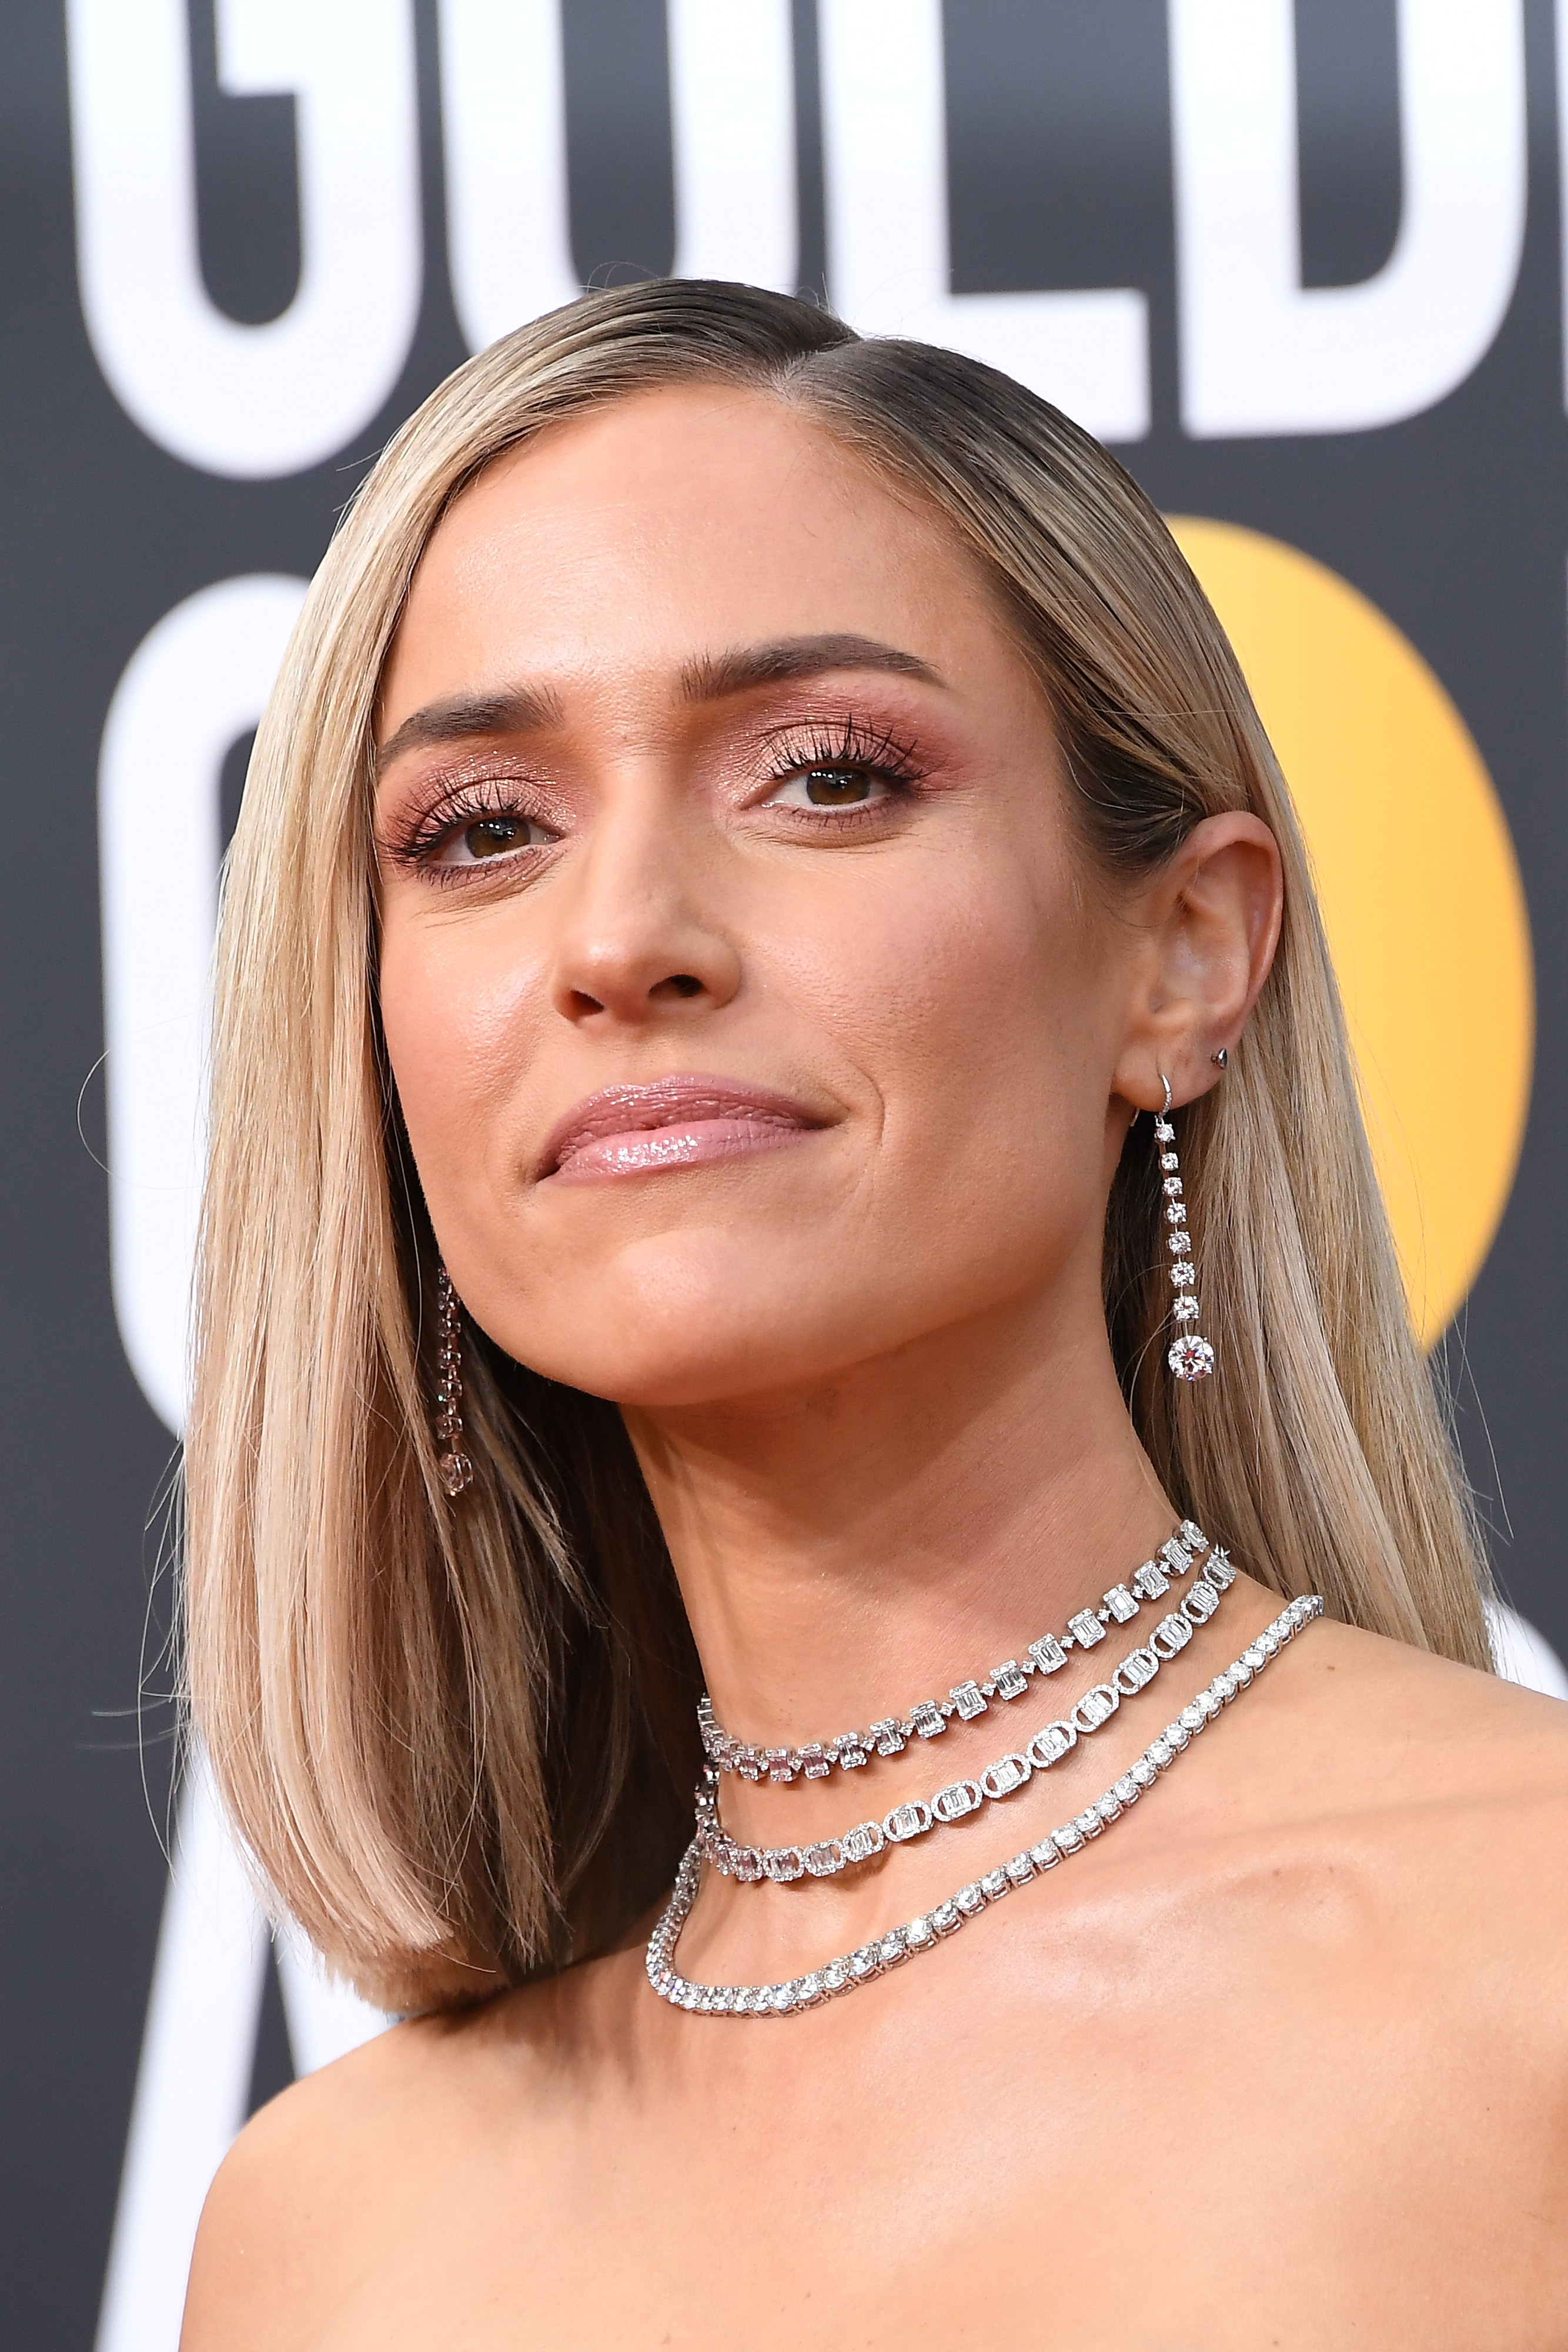 Close-up of Kristin at an event, wearing a sparkling necklace and earrings